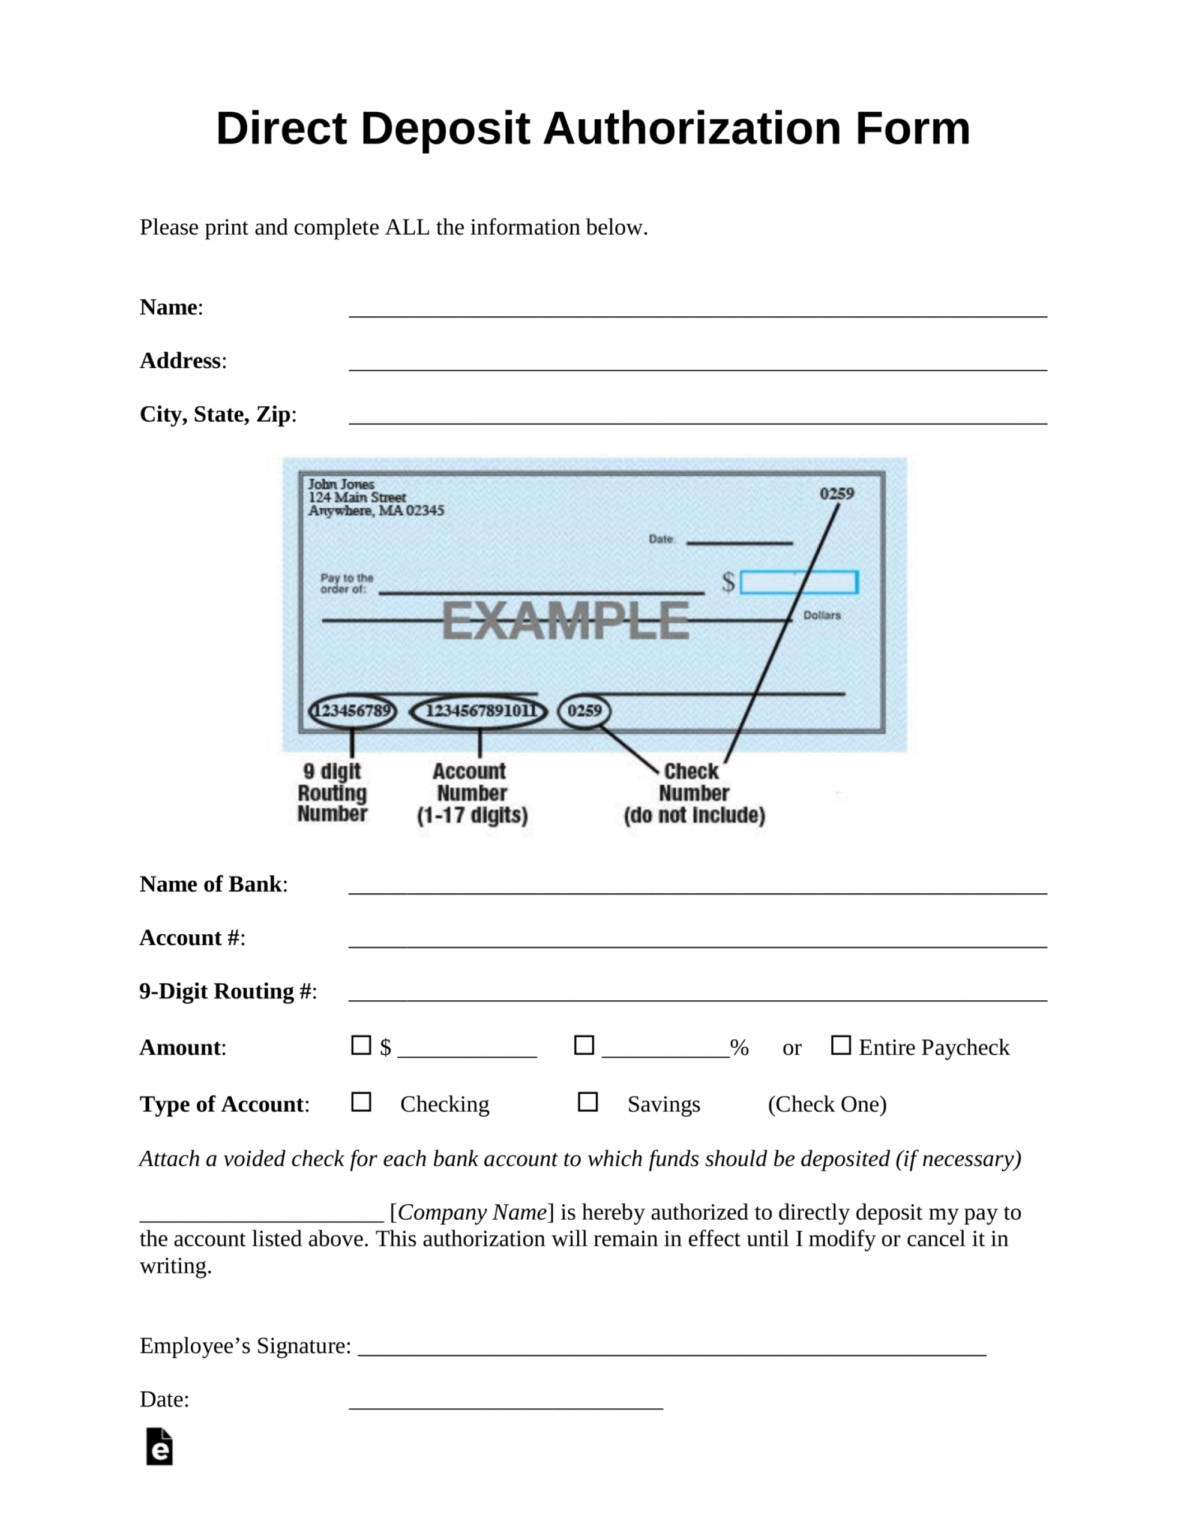 001 Generic Direct Deposit Authorization Form Template Bank Direct